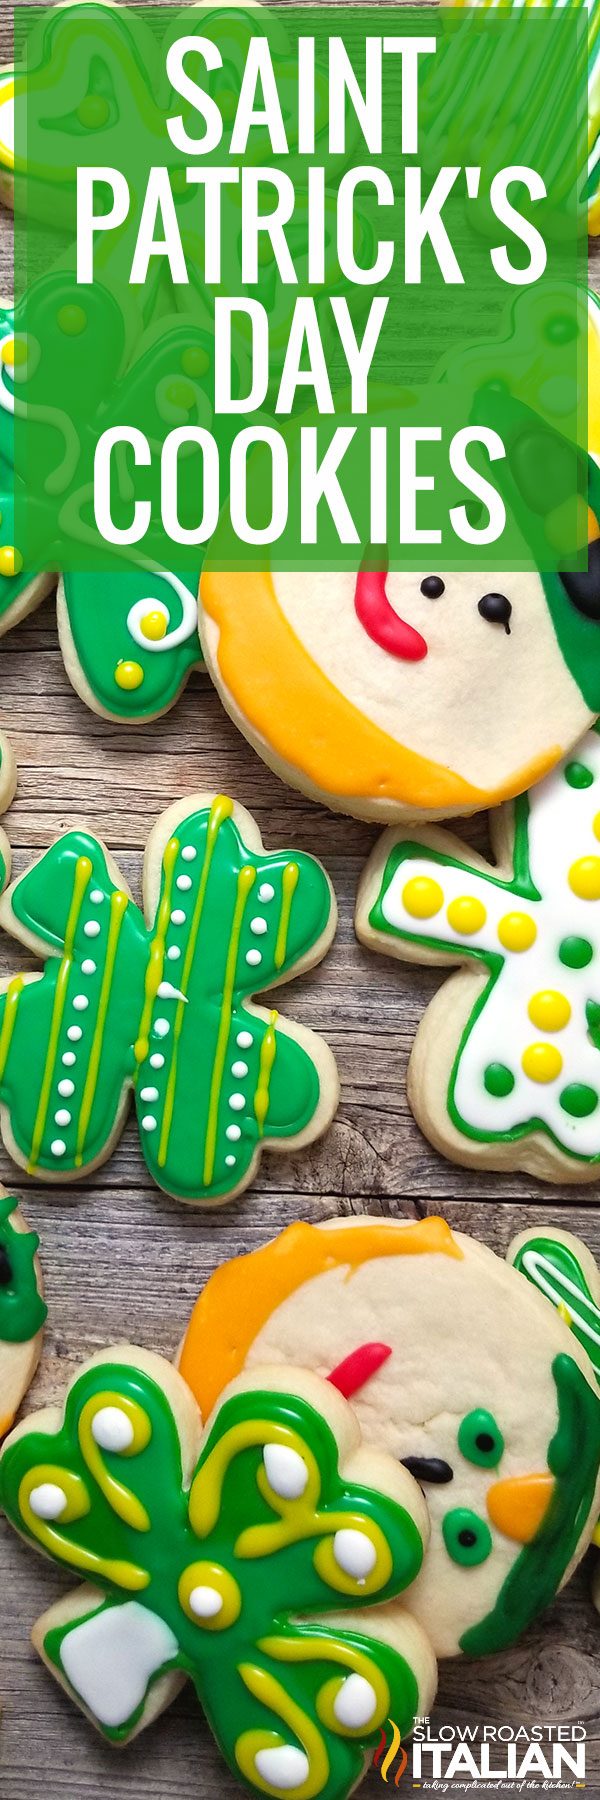 Decorated St. Patrick's Day Cookies